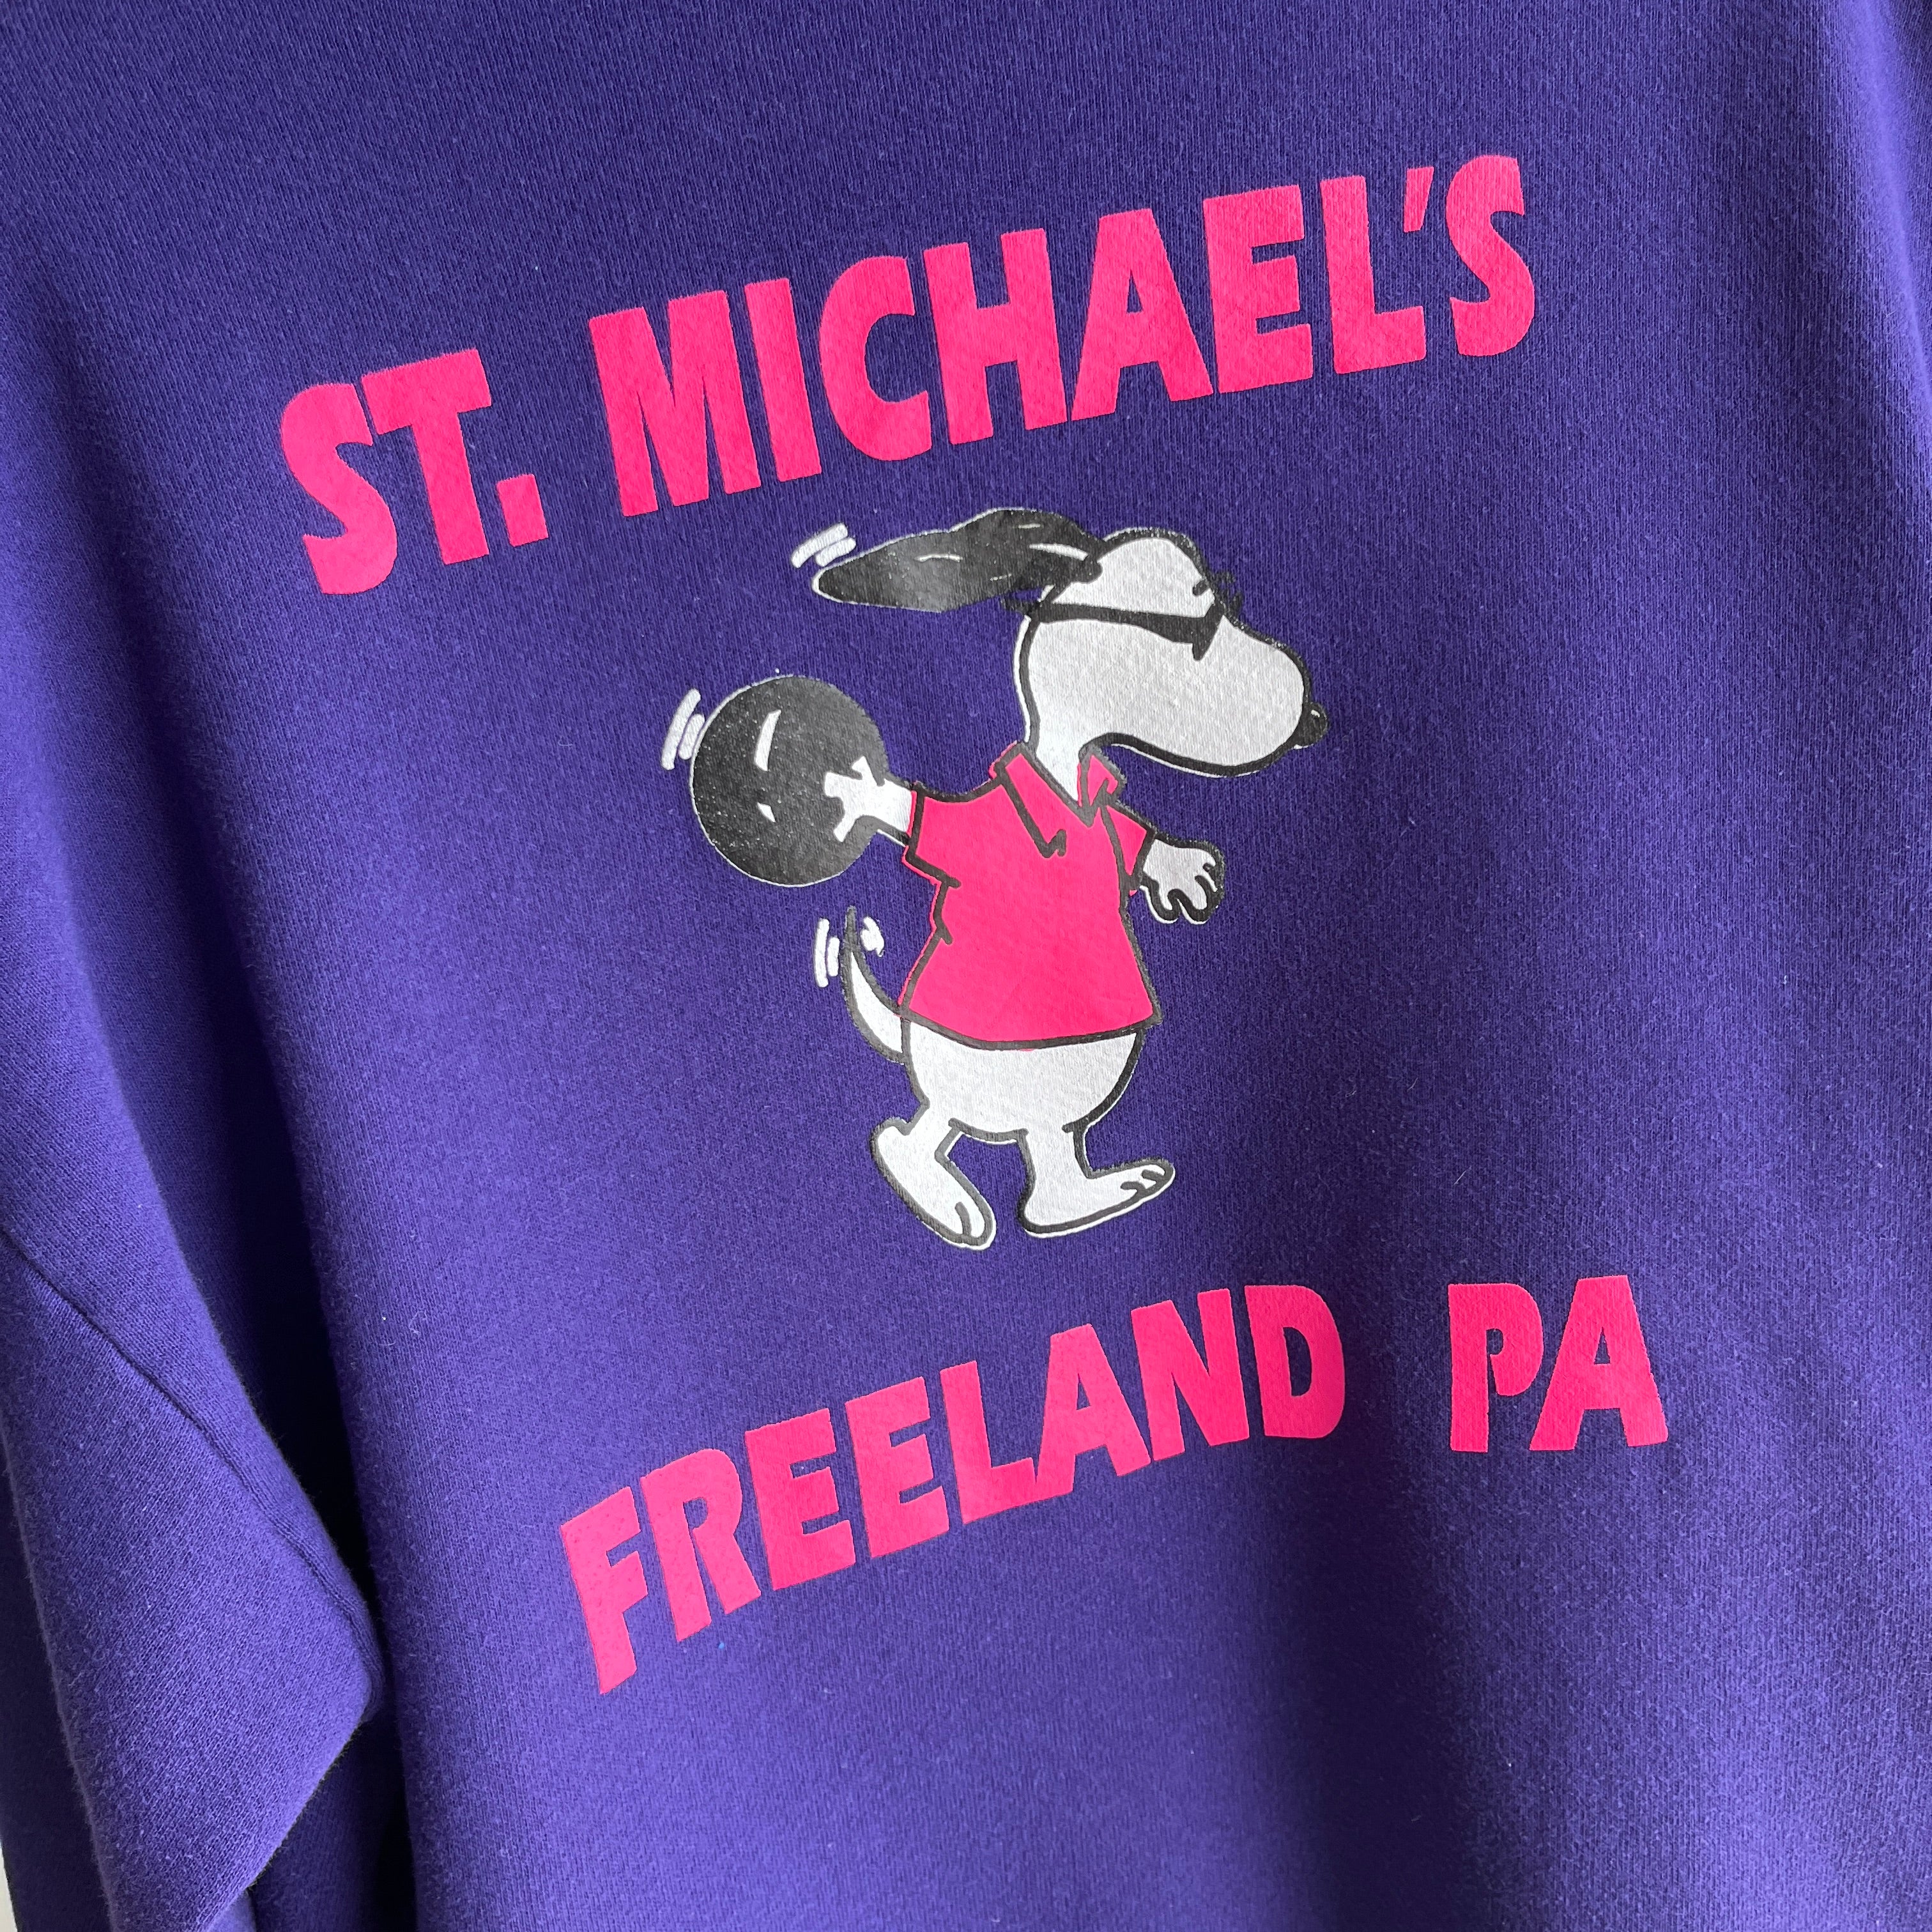 1980/90s St. Michael's Junior Bowling, Freeland PA - The Backside!